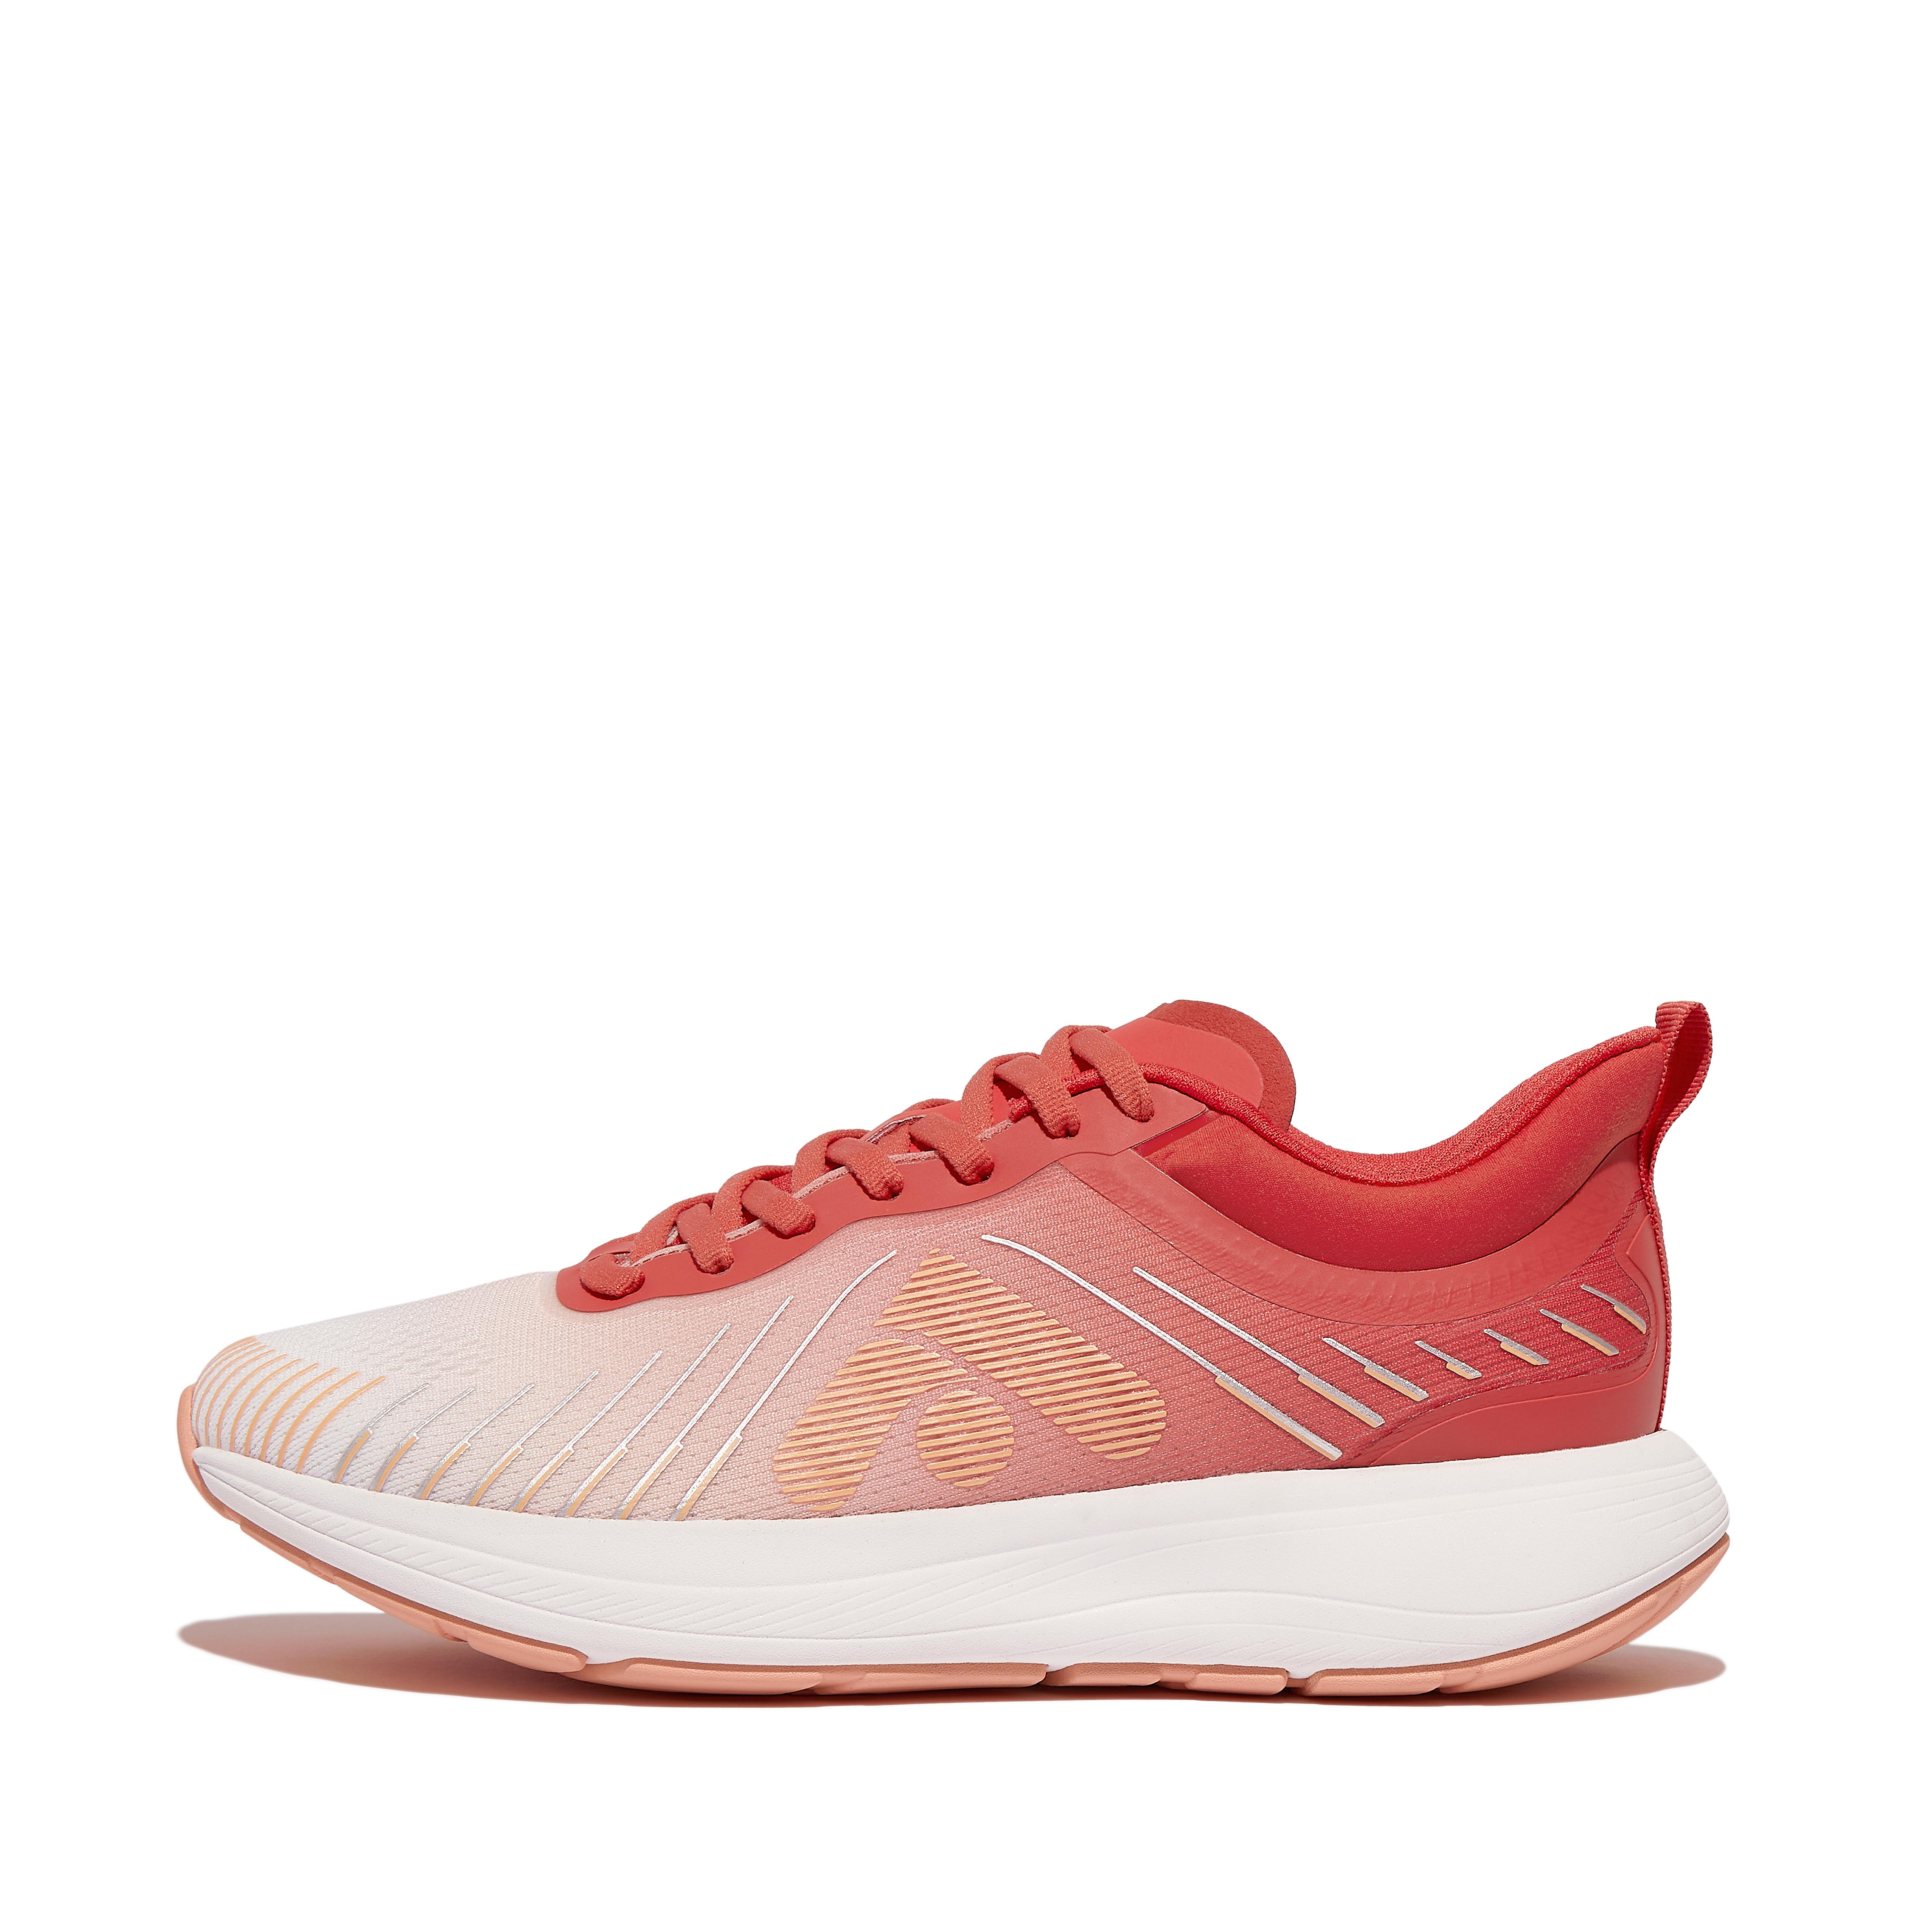 Fitflop Ombre-Edition Mesh Running/Sports Sneakers,red-coral-rosy/coral-blushy